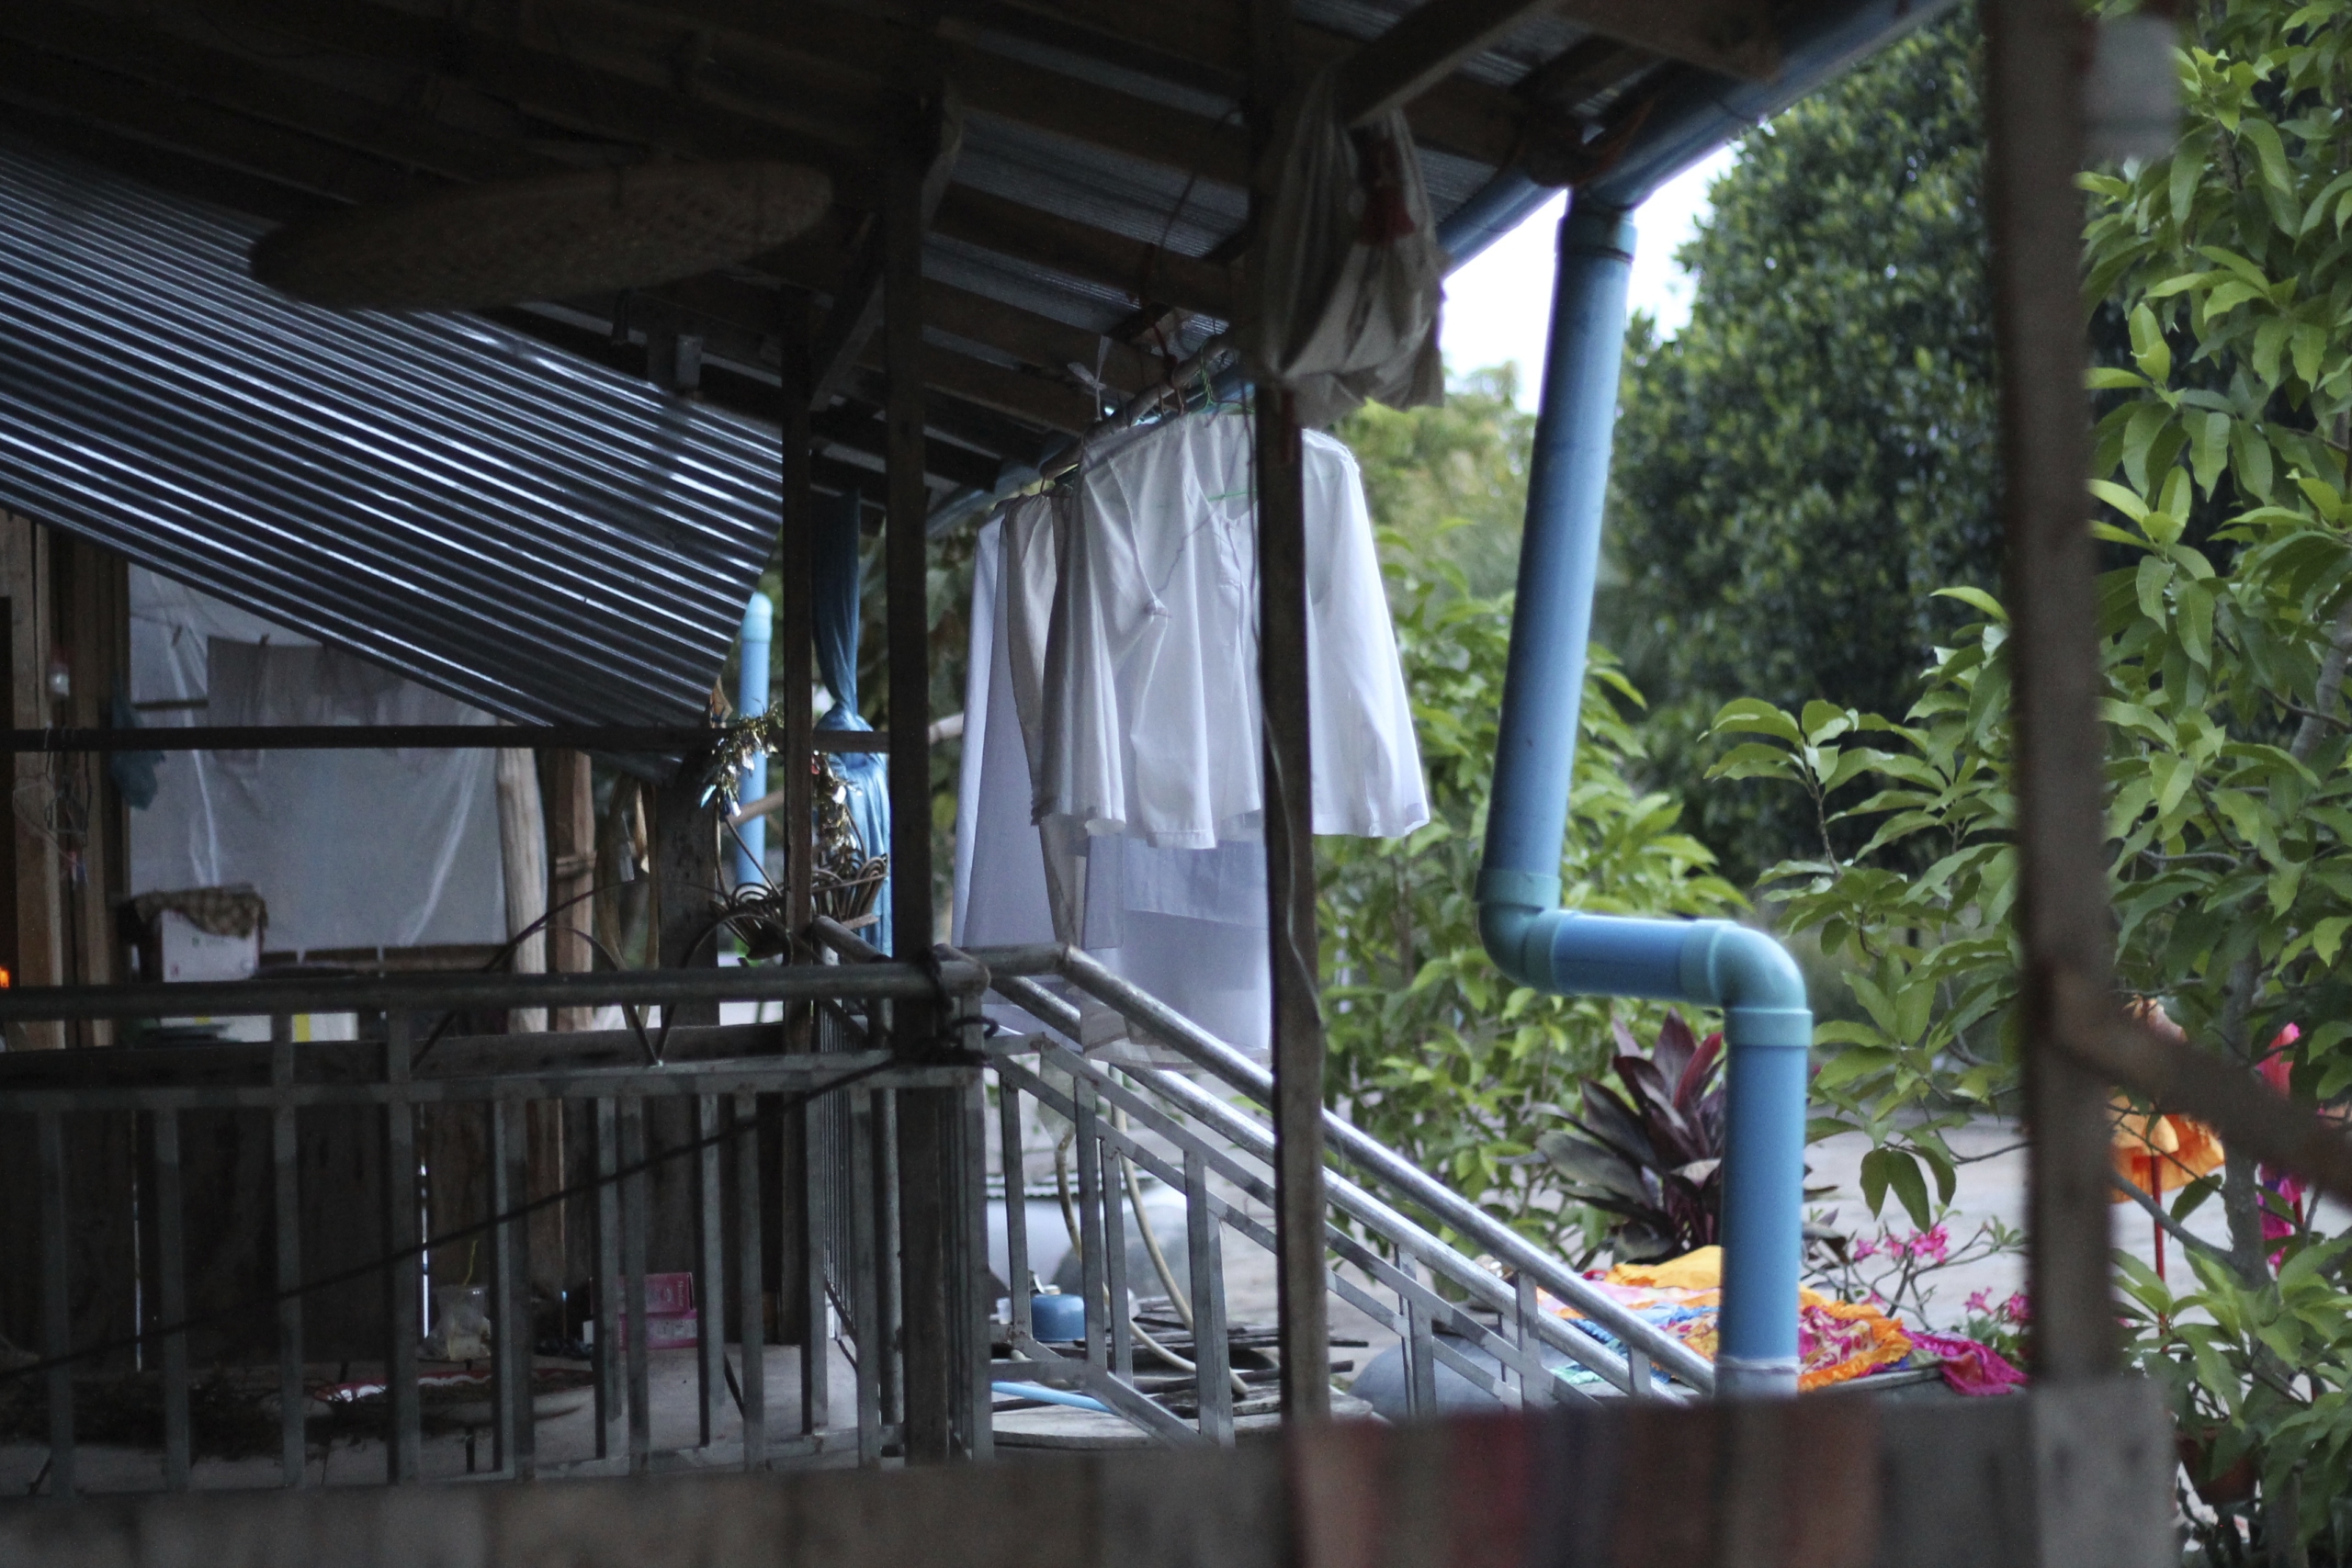 Living quarters of donji at the Buddhist Center. Corrugated metal awning over a small deck with metal railings. You can see these female renunciants’ white robes drying after a wash.